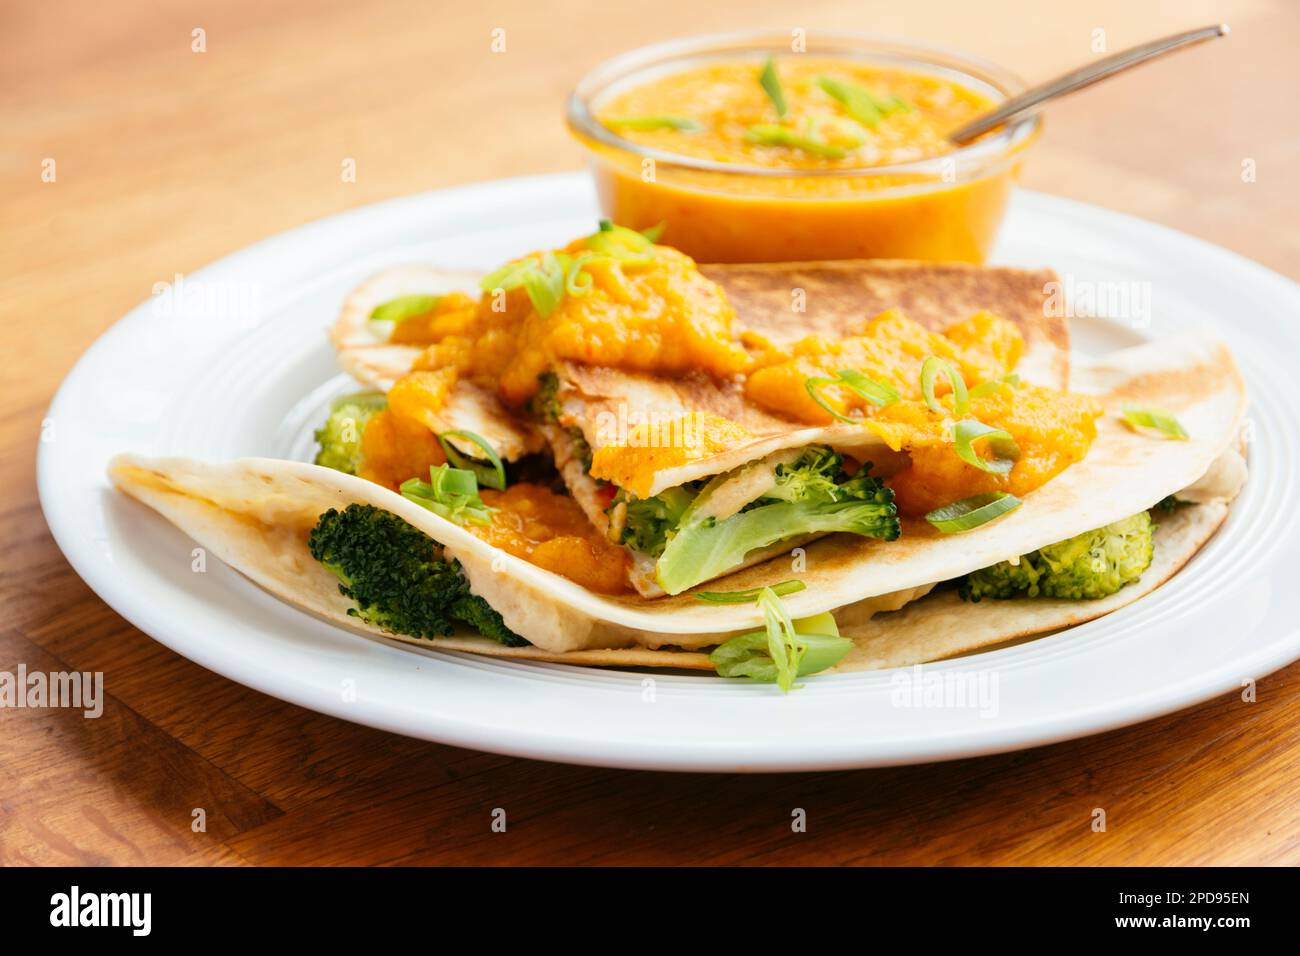 Plate with vegan broccoli quesadillas, served with an apricot-carrot sauce. Stock Photo